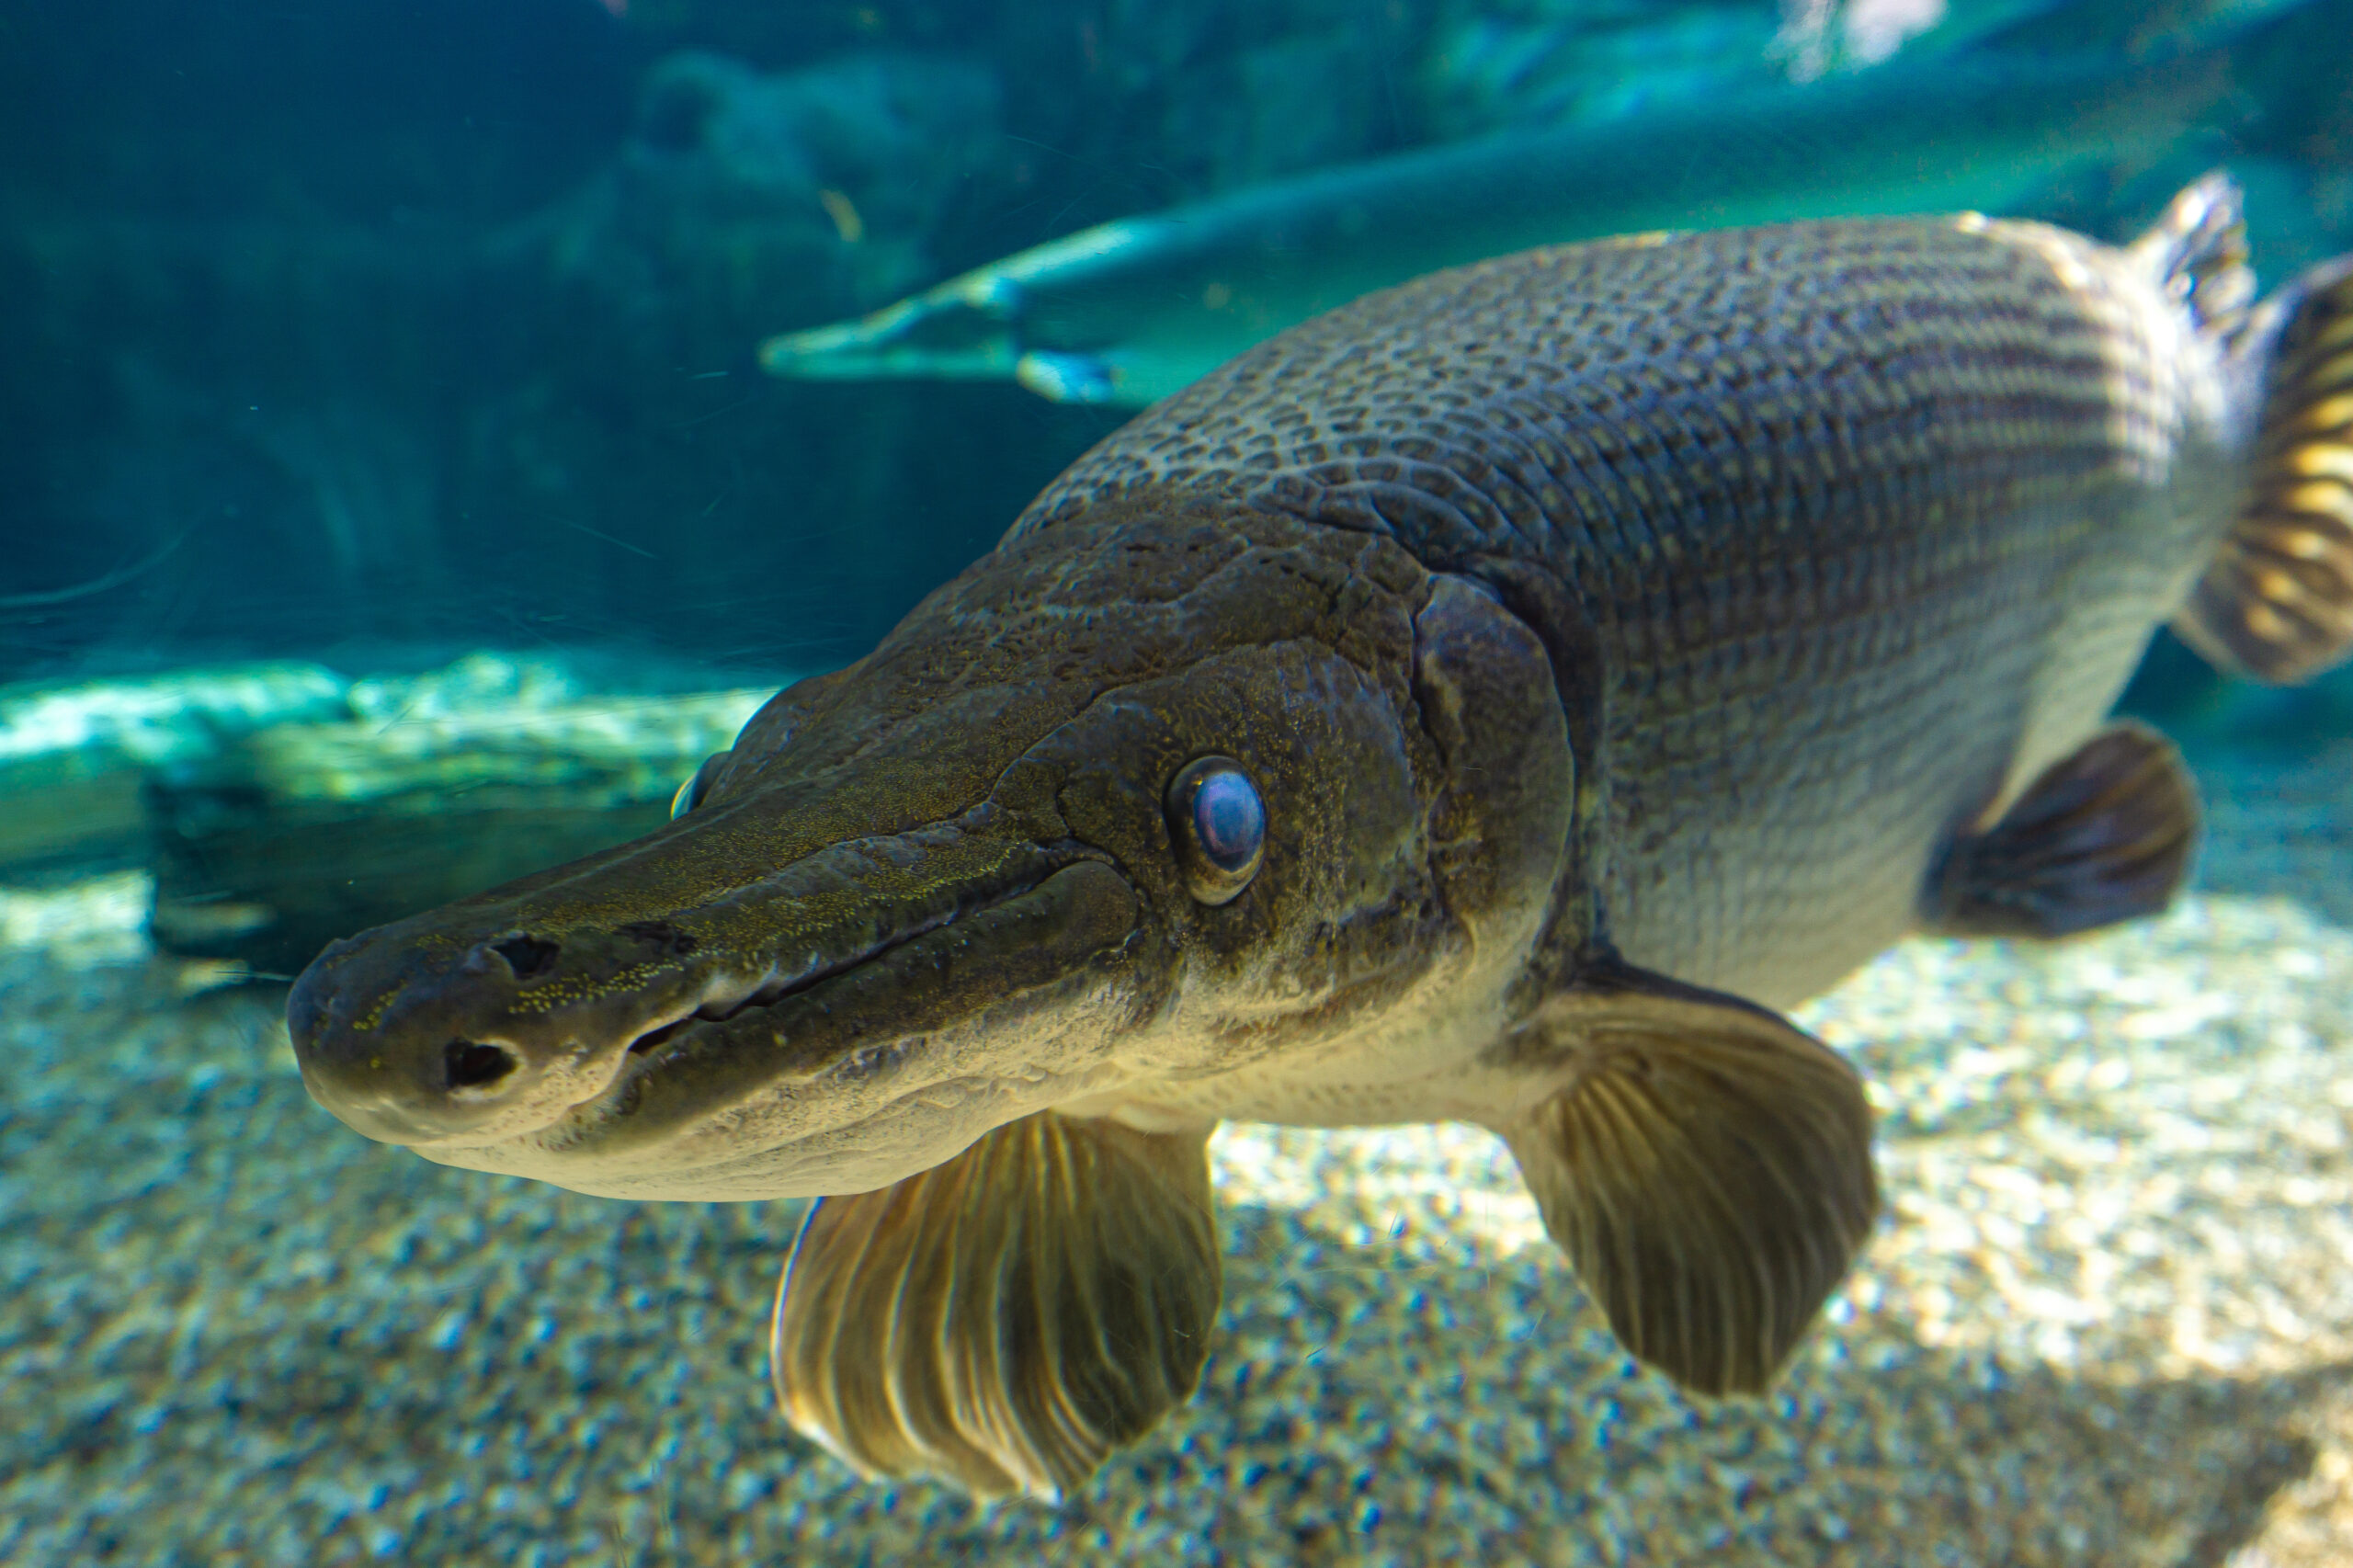 An alligator gar in a tank approaches the camera with its pointy, toothy mouth and beady eye gazing at the viewer.